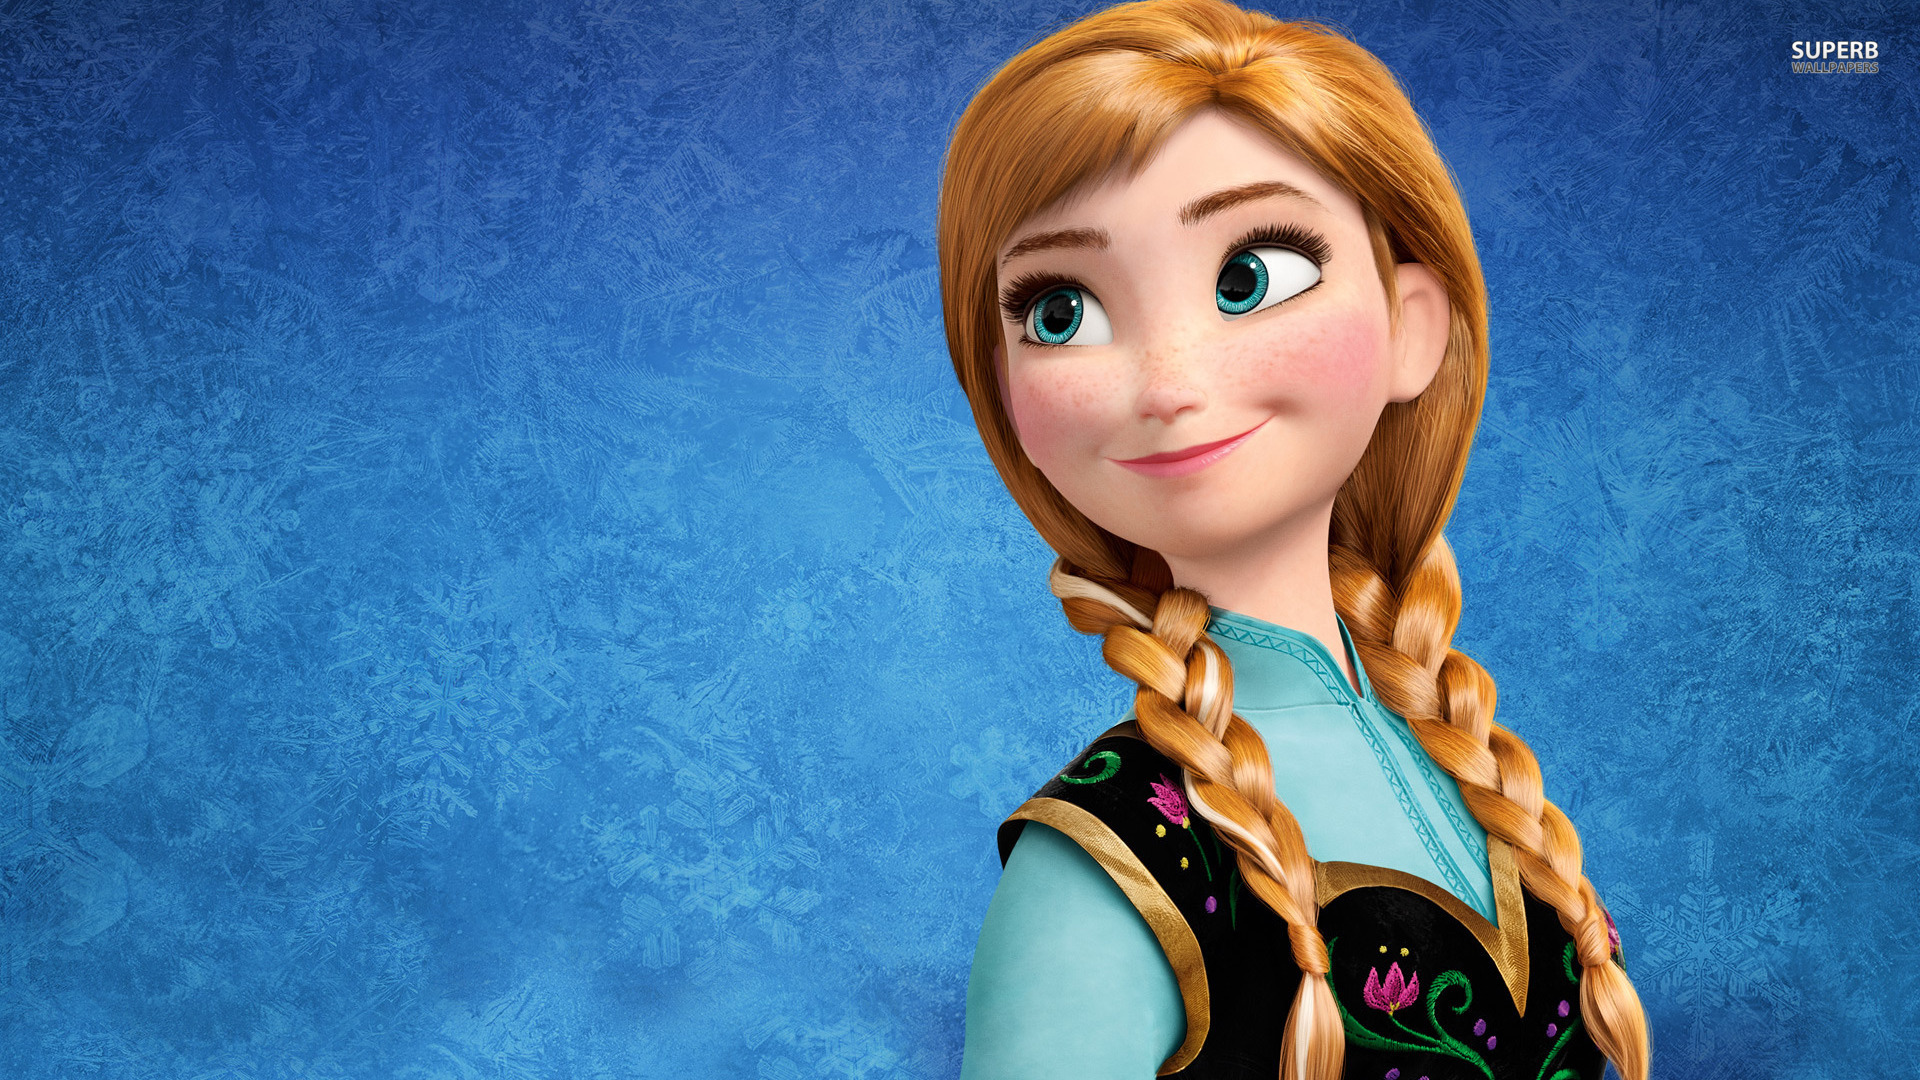 Anna HD Wallpapers, Animation And Cartoon Backgrounds